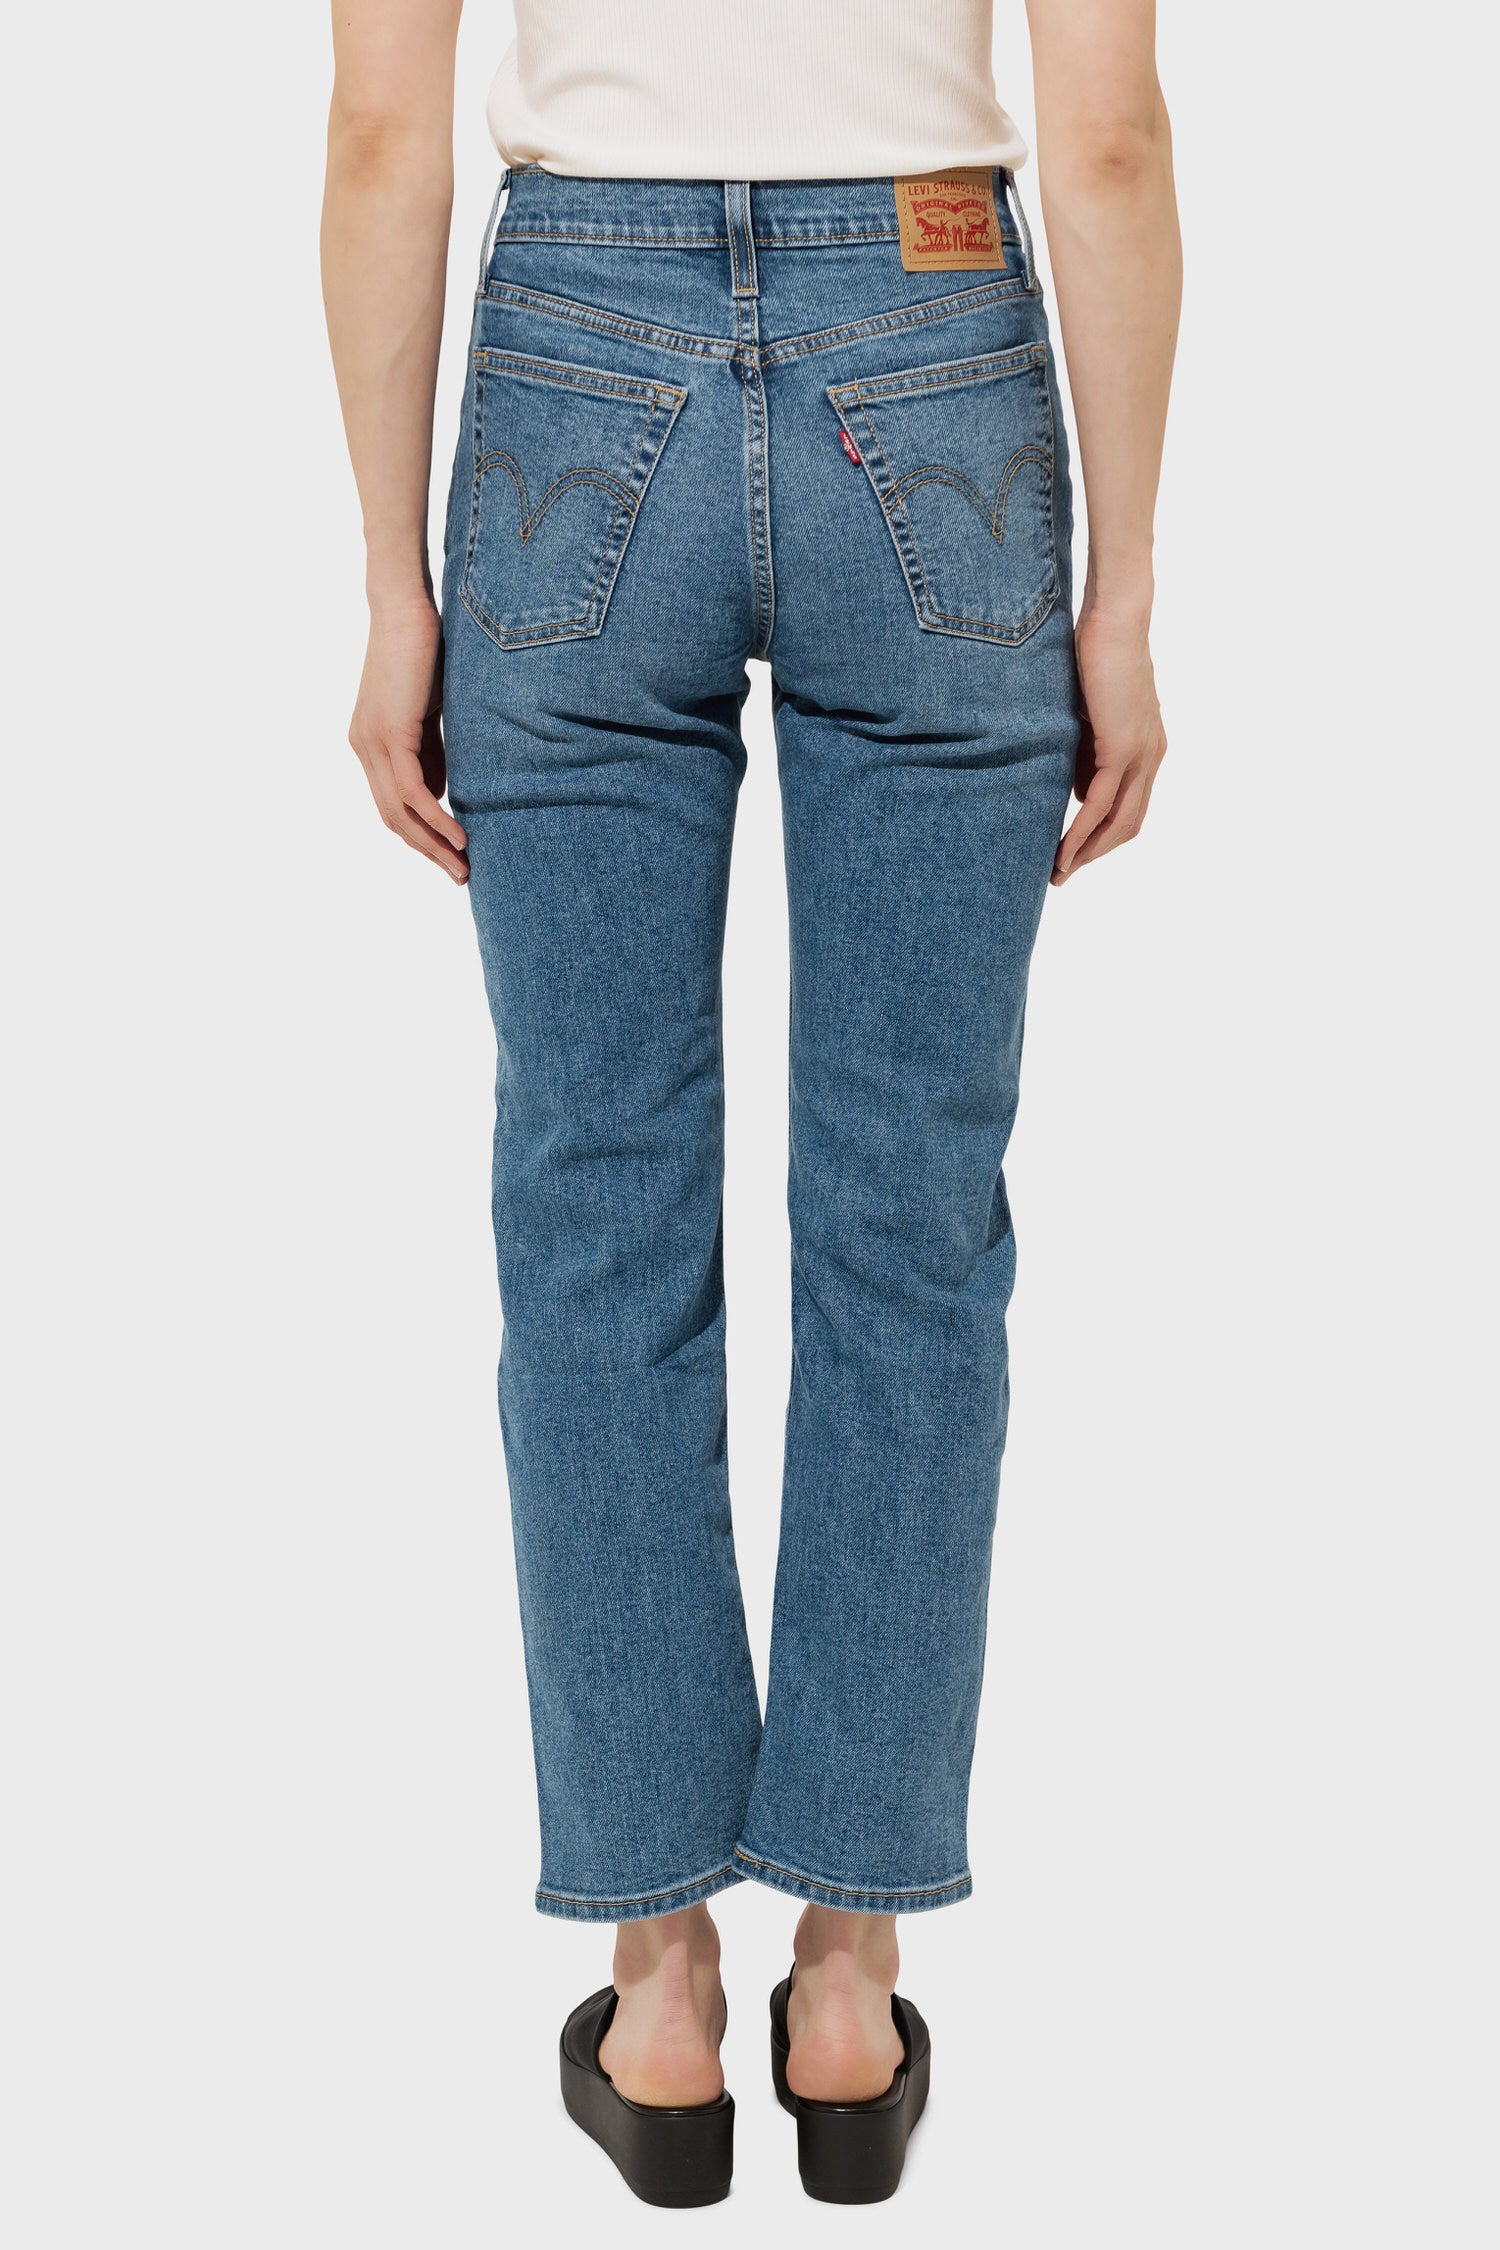 Women's Levi's Wedgie Straight Fit in Love in the Mist — Philistine